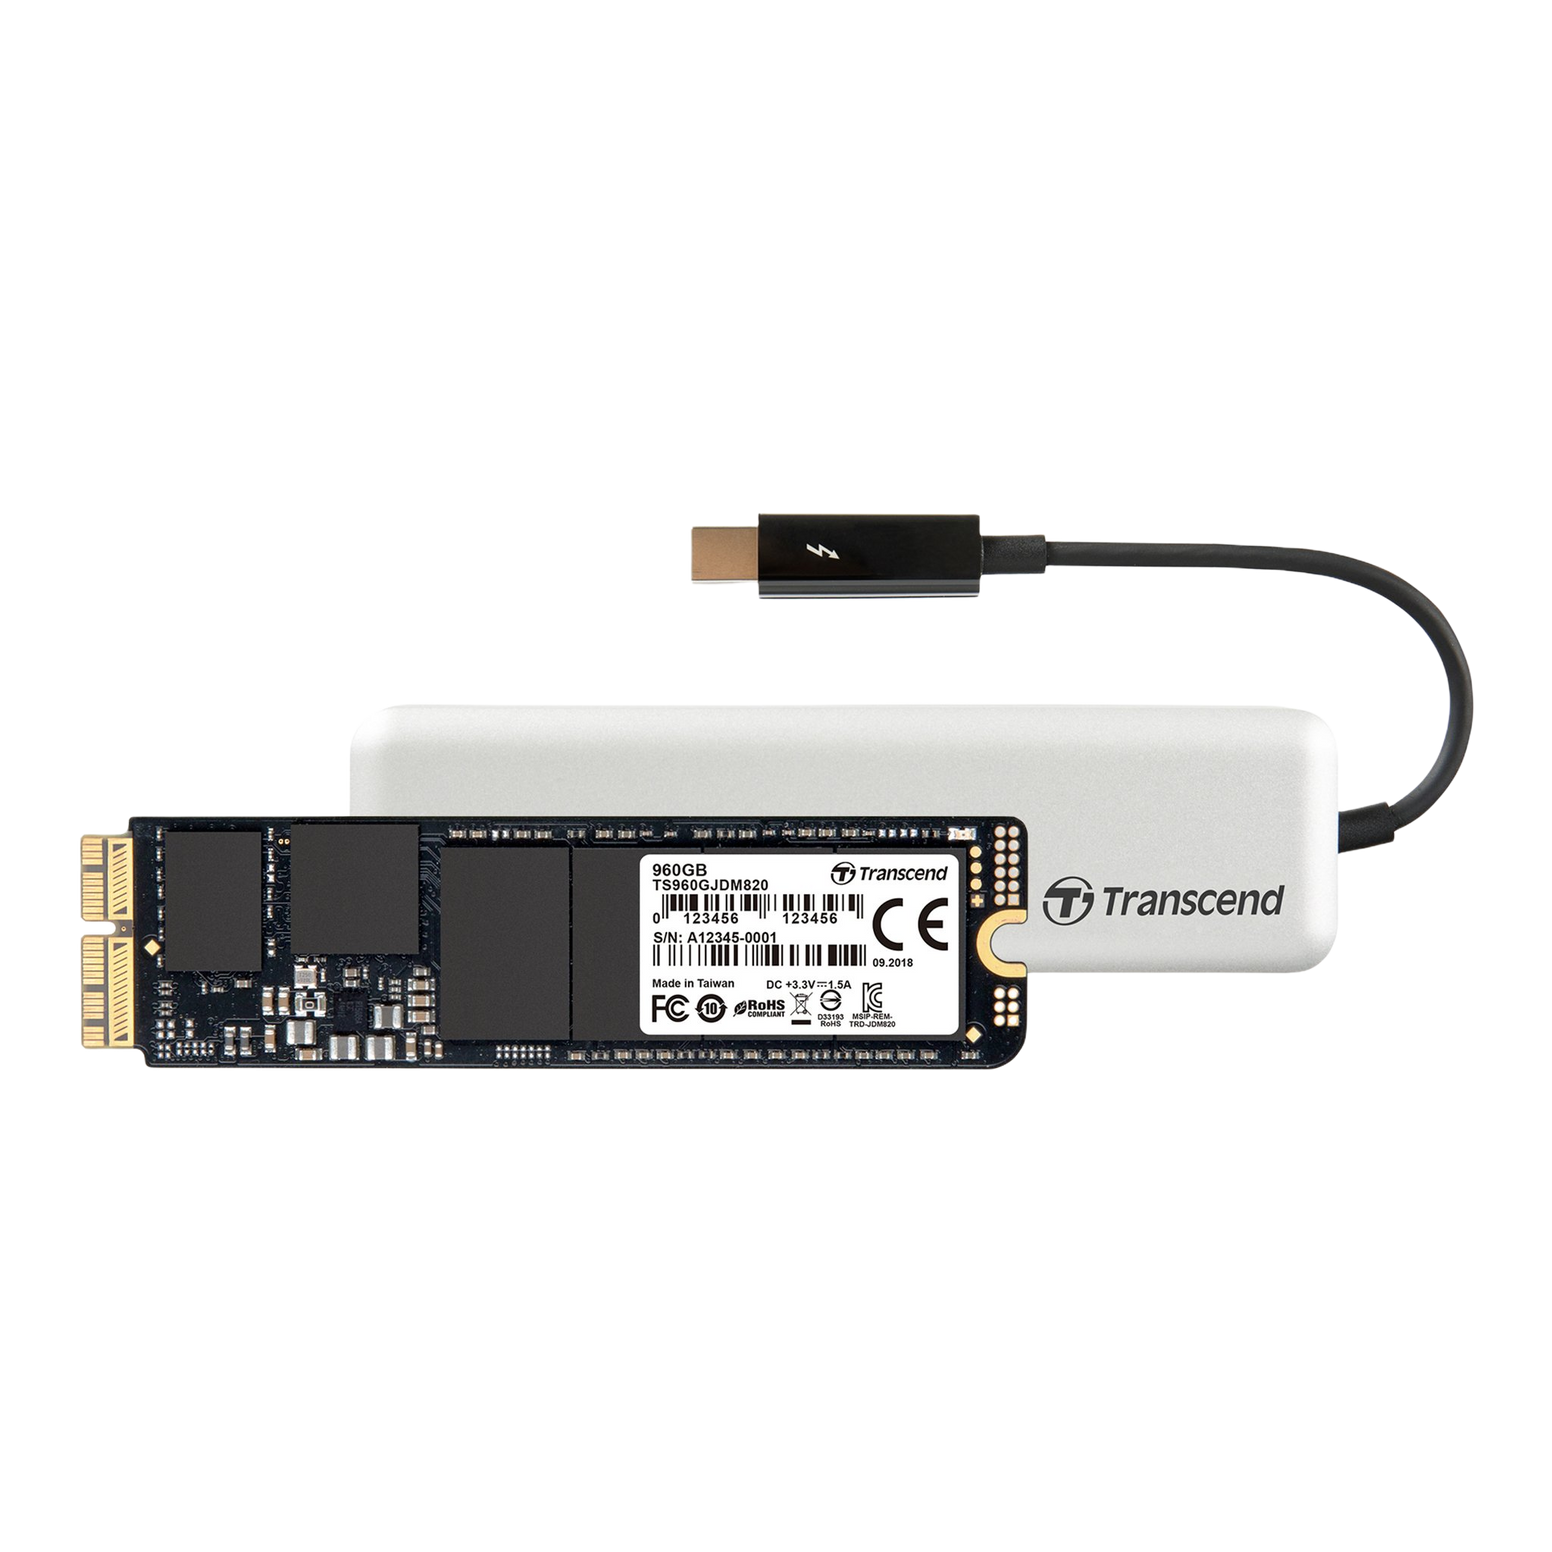 Transcend 480GB Jet Drive 825 Upgrade Kit for MacBook Pro (Late 2013 - Early 2015), MacBook Air (Mid 2013 - Early 2015), Mac mini (Late 2014), Mac Pro (Late 2013) - AHCI Gen3 x2